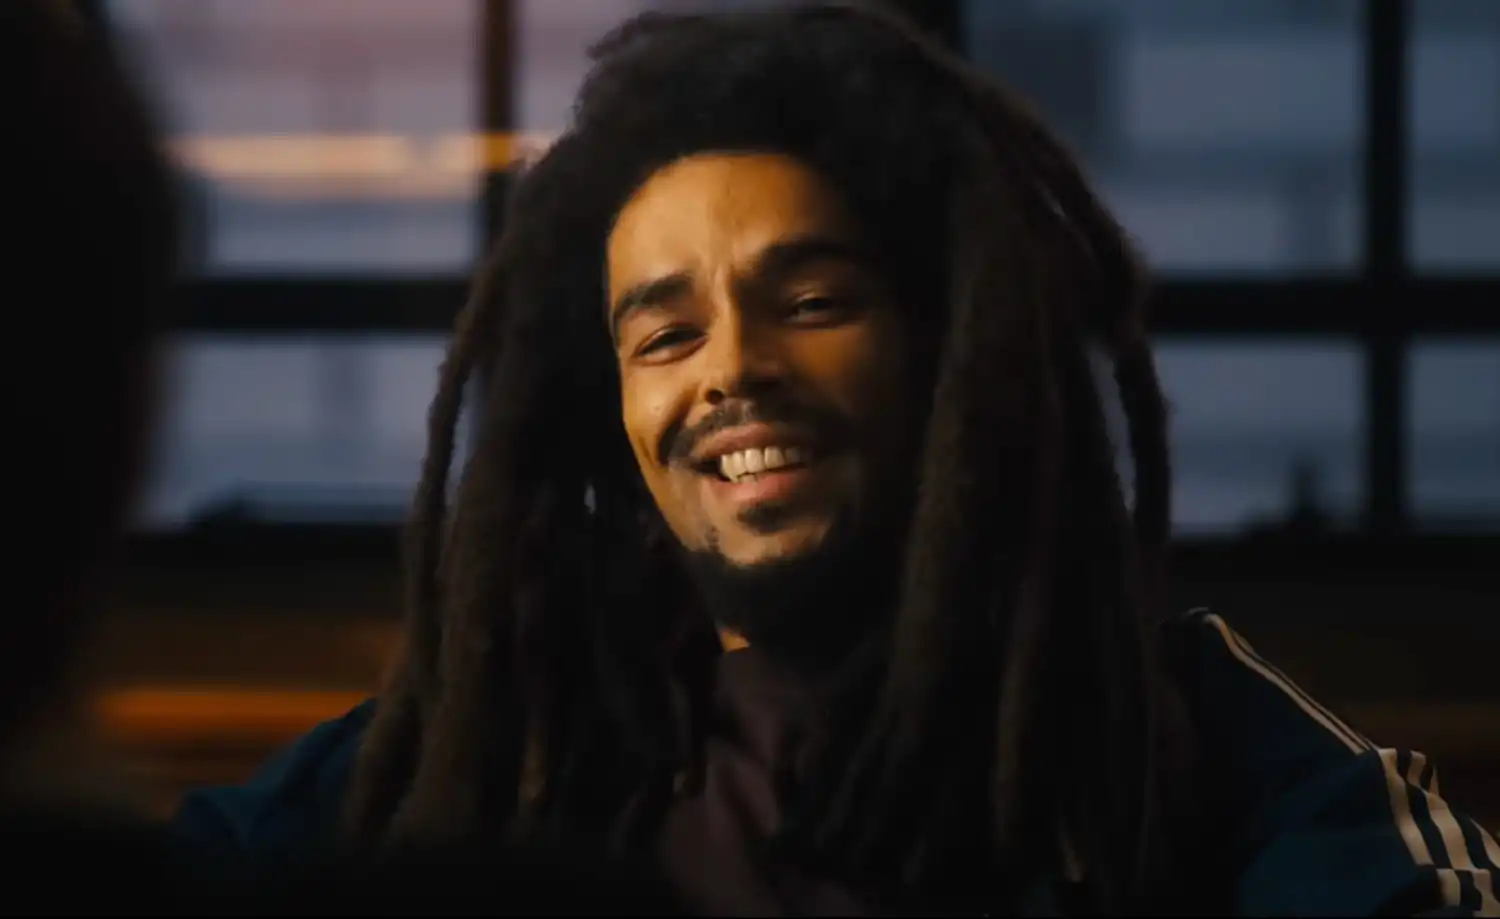 Bob Marley biopic lead actor receives approval from Ziggy Marley for ''One Love''